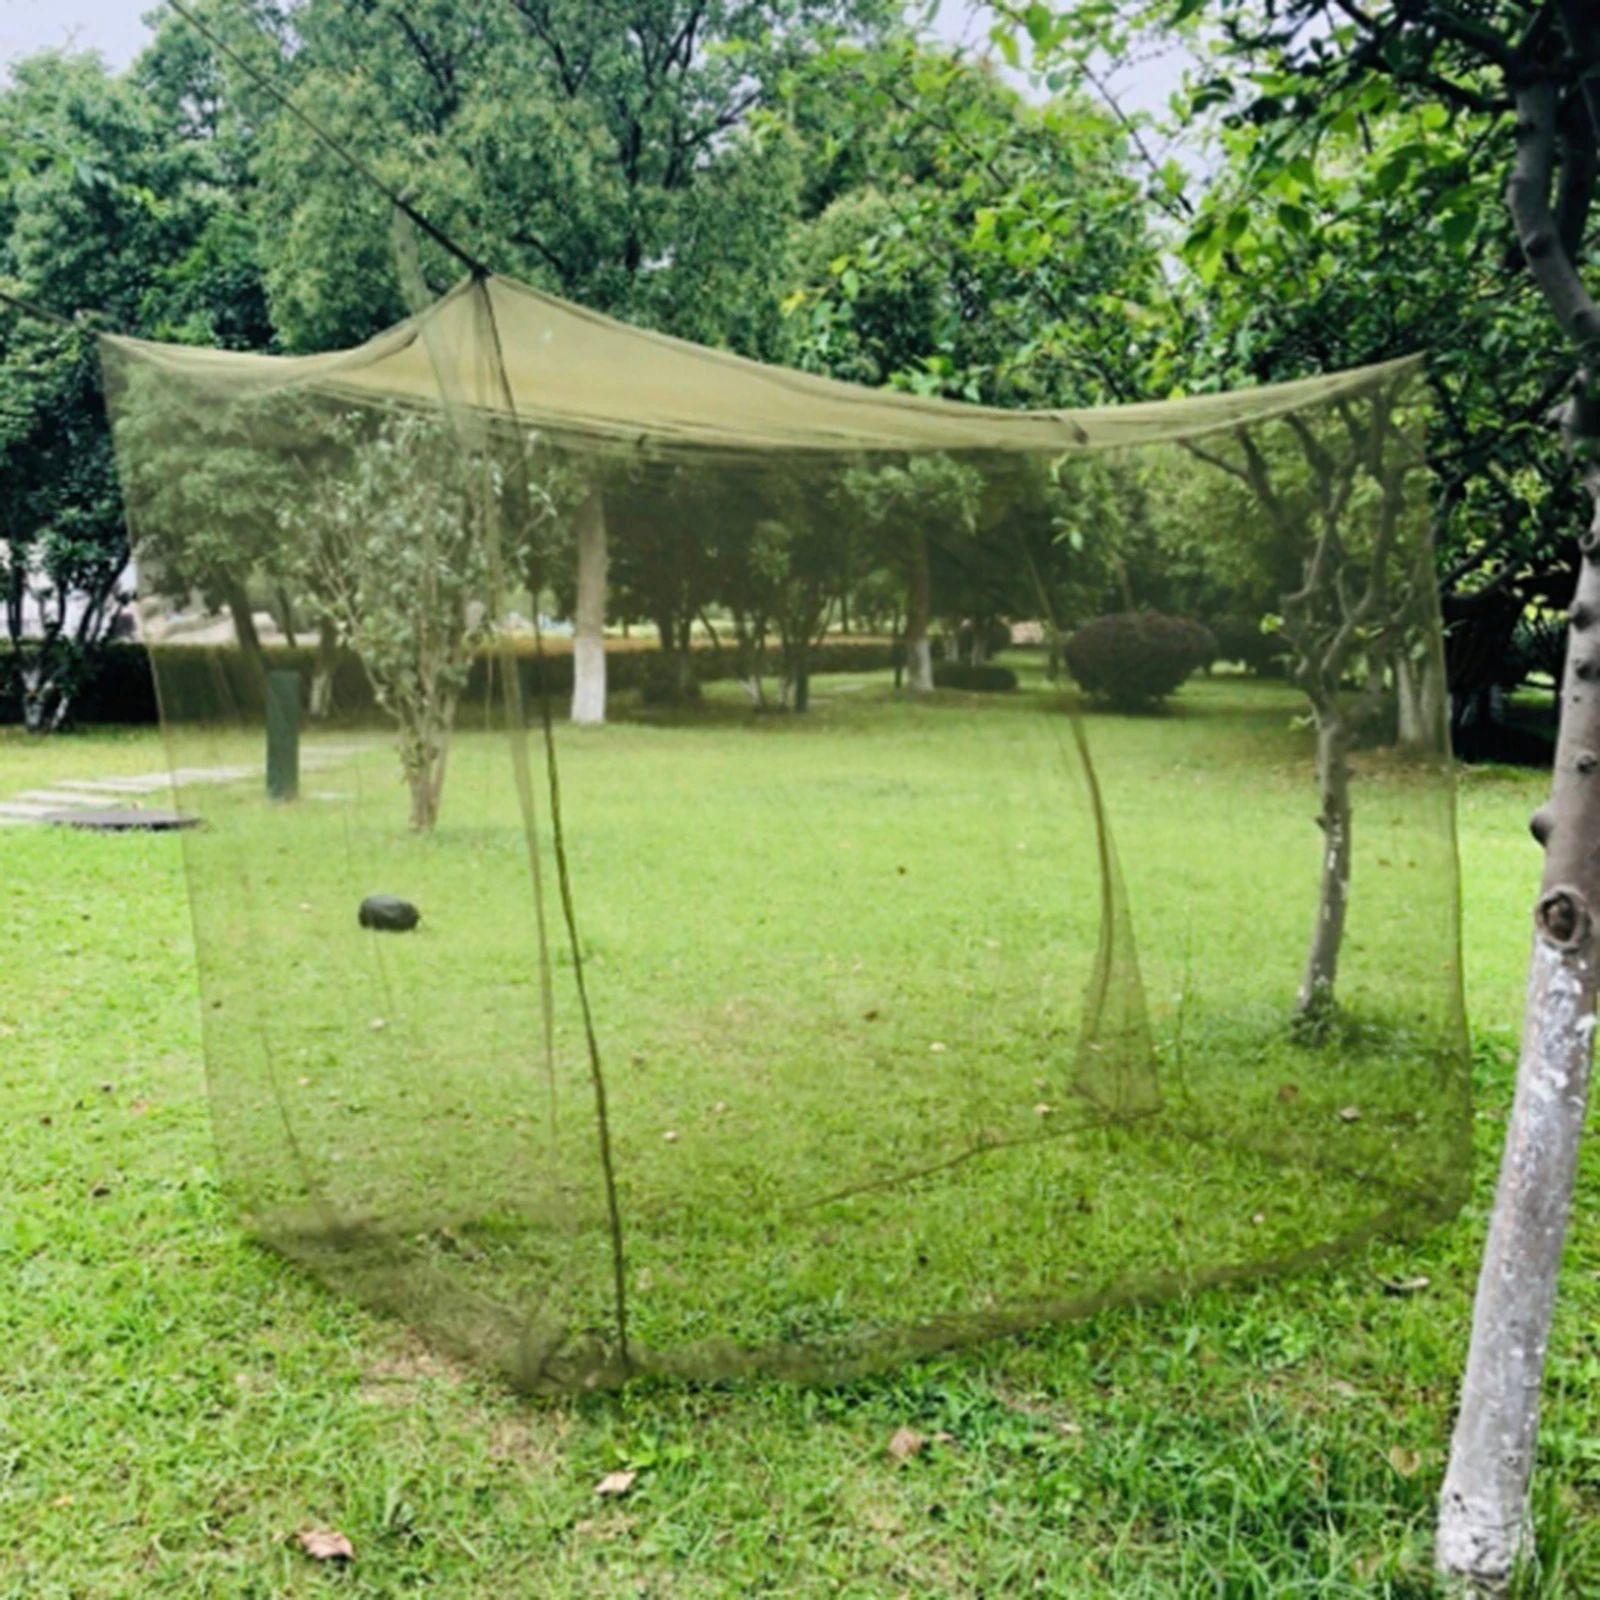 Camping Mosquito Net Portable Dense Mesh Outdoor Travel Tent Army Green Mosquito Net Summer Sleeping Yard Patio